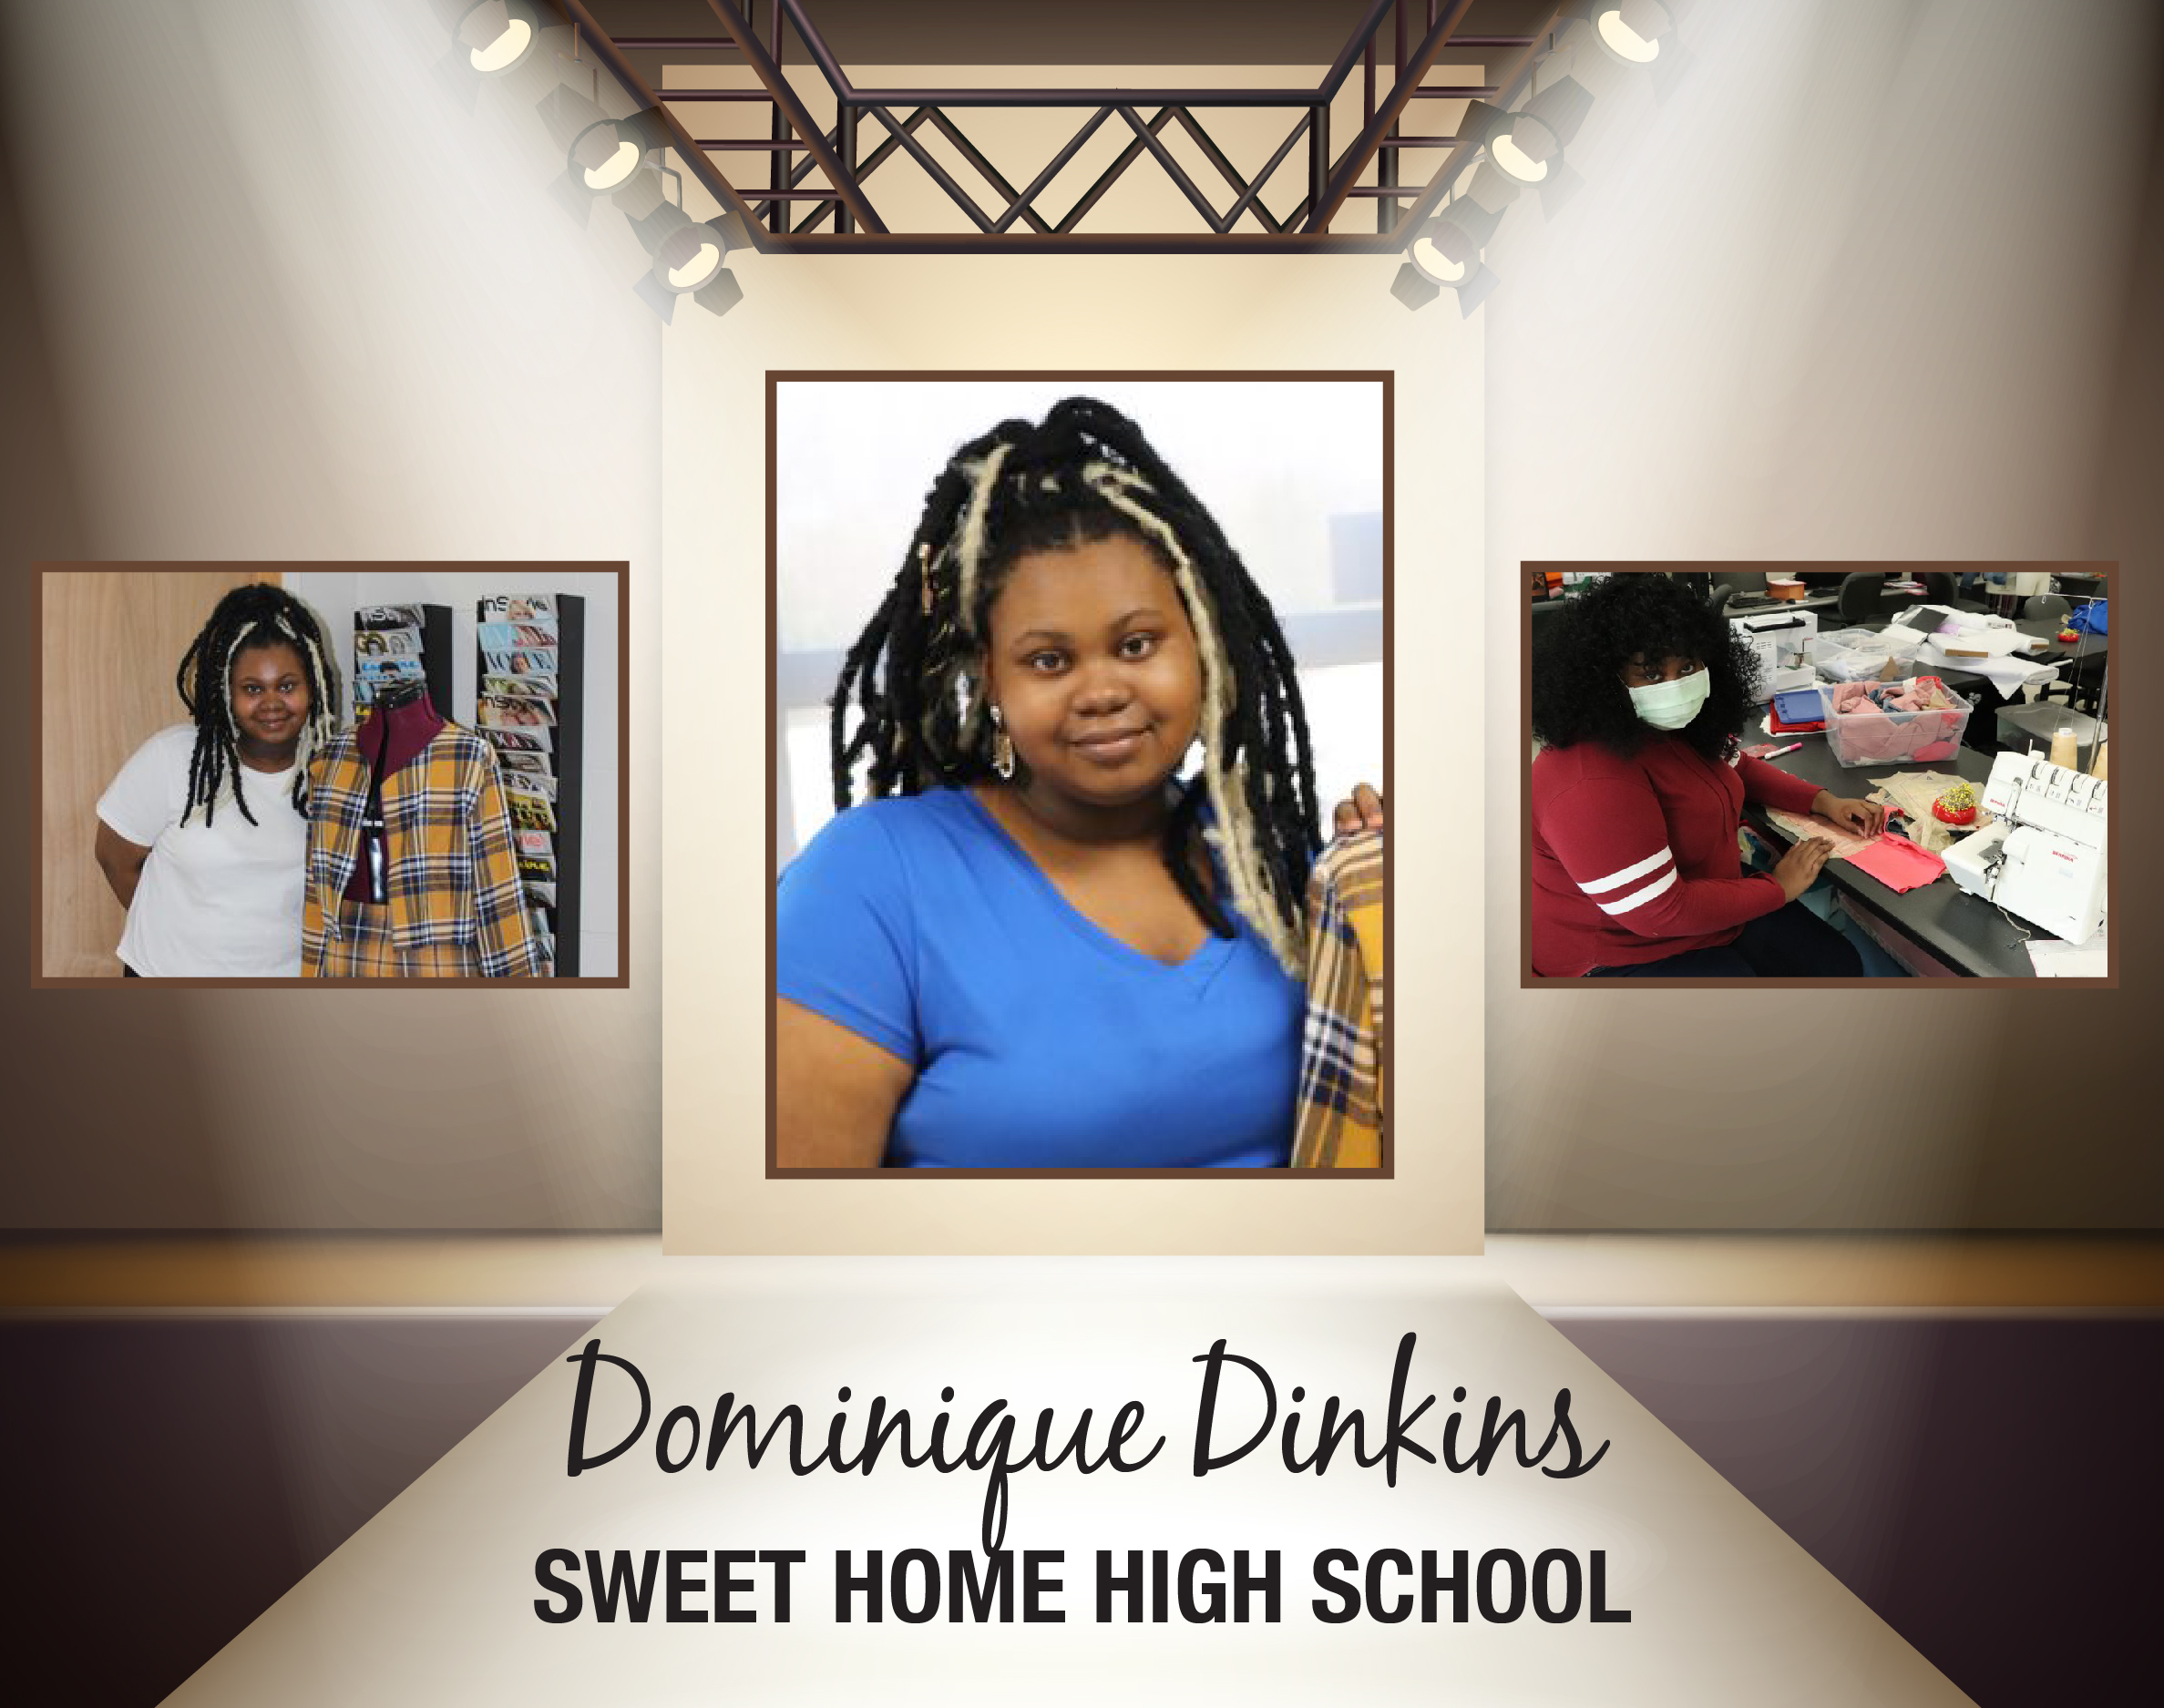 Dominique Dinkins Sweet Home High School